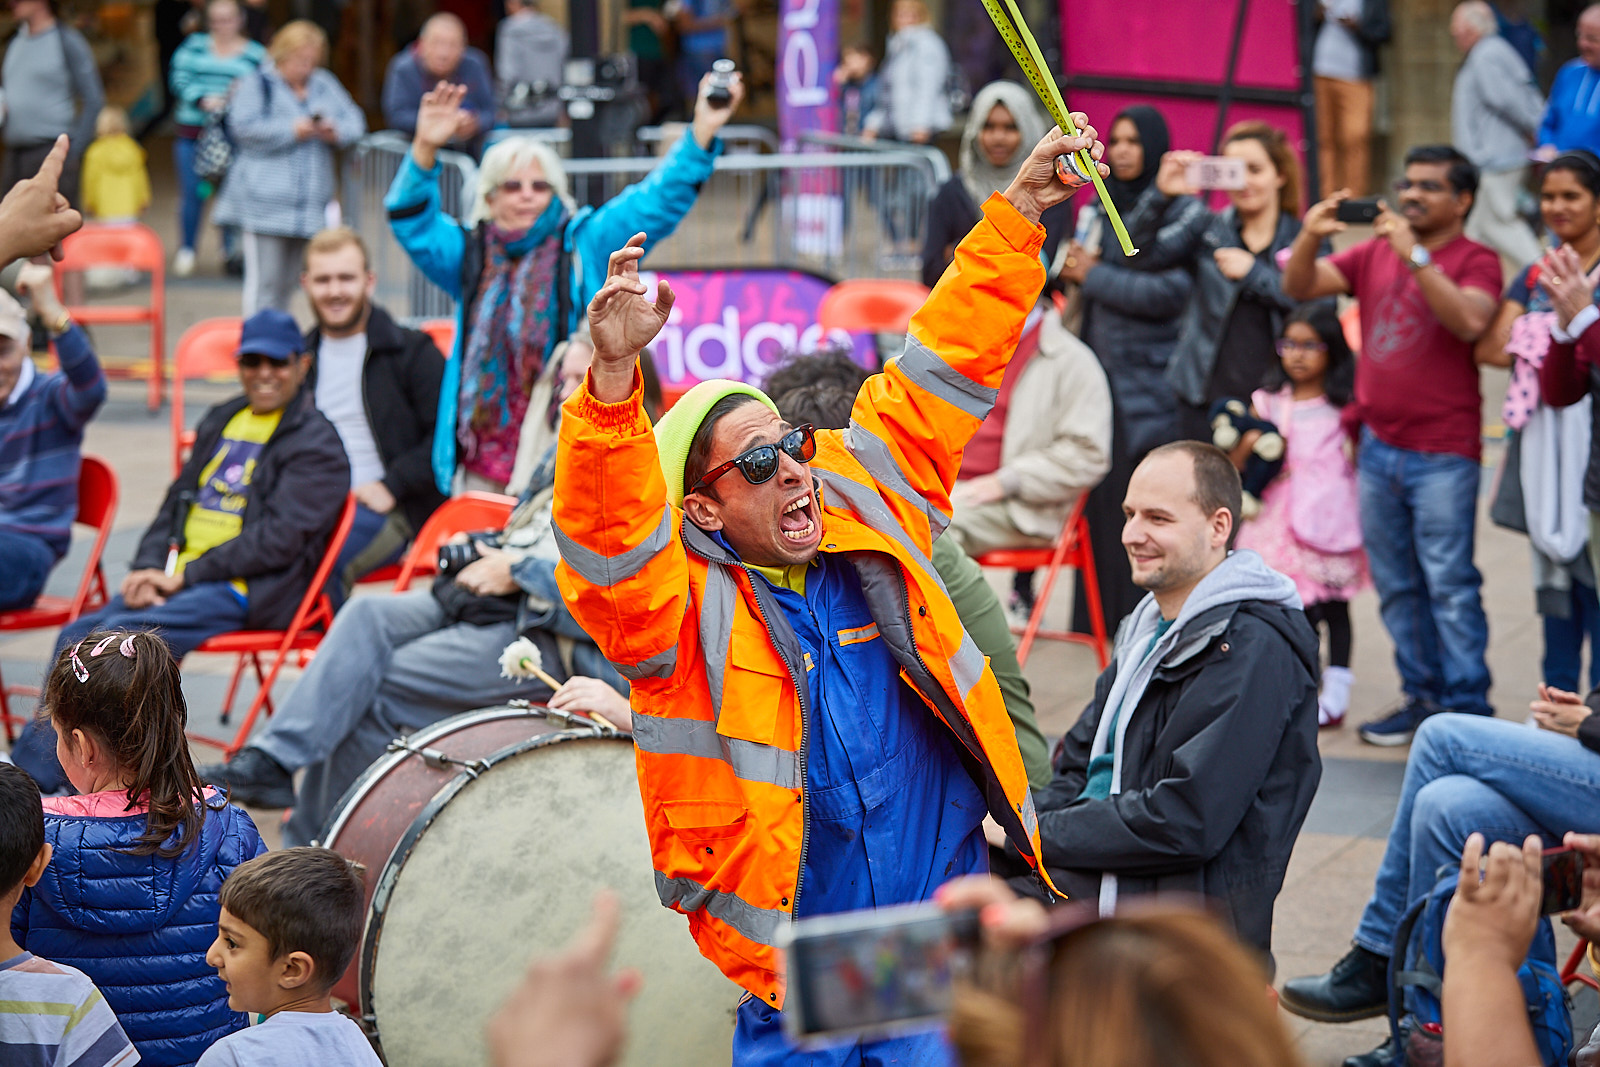 An actor dressed in high-vis jacket and overalls raises his hands to the crowd whilst pulling a funny expression. Behind him a lady copies his action. They are surrounded by musicians and audiences. People are smiling.